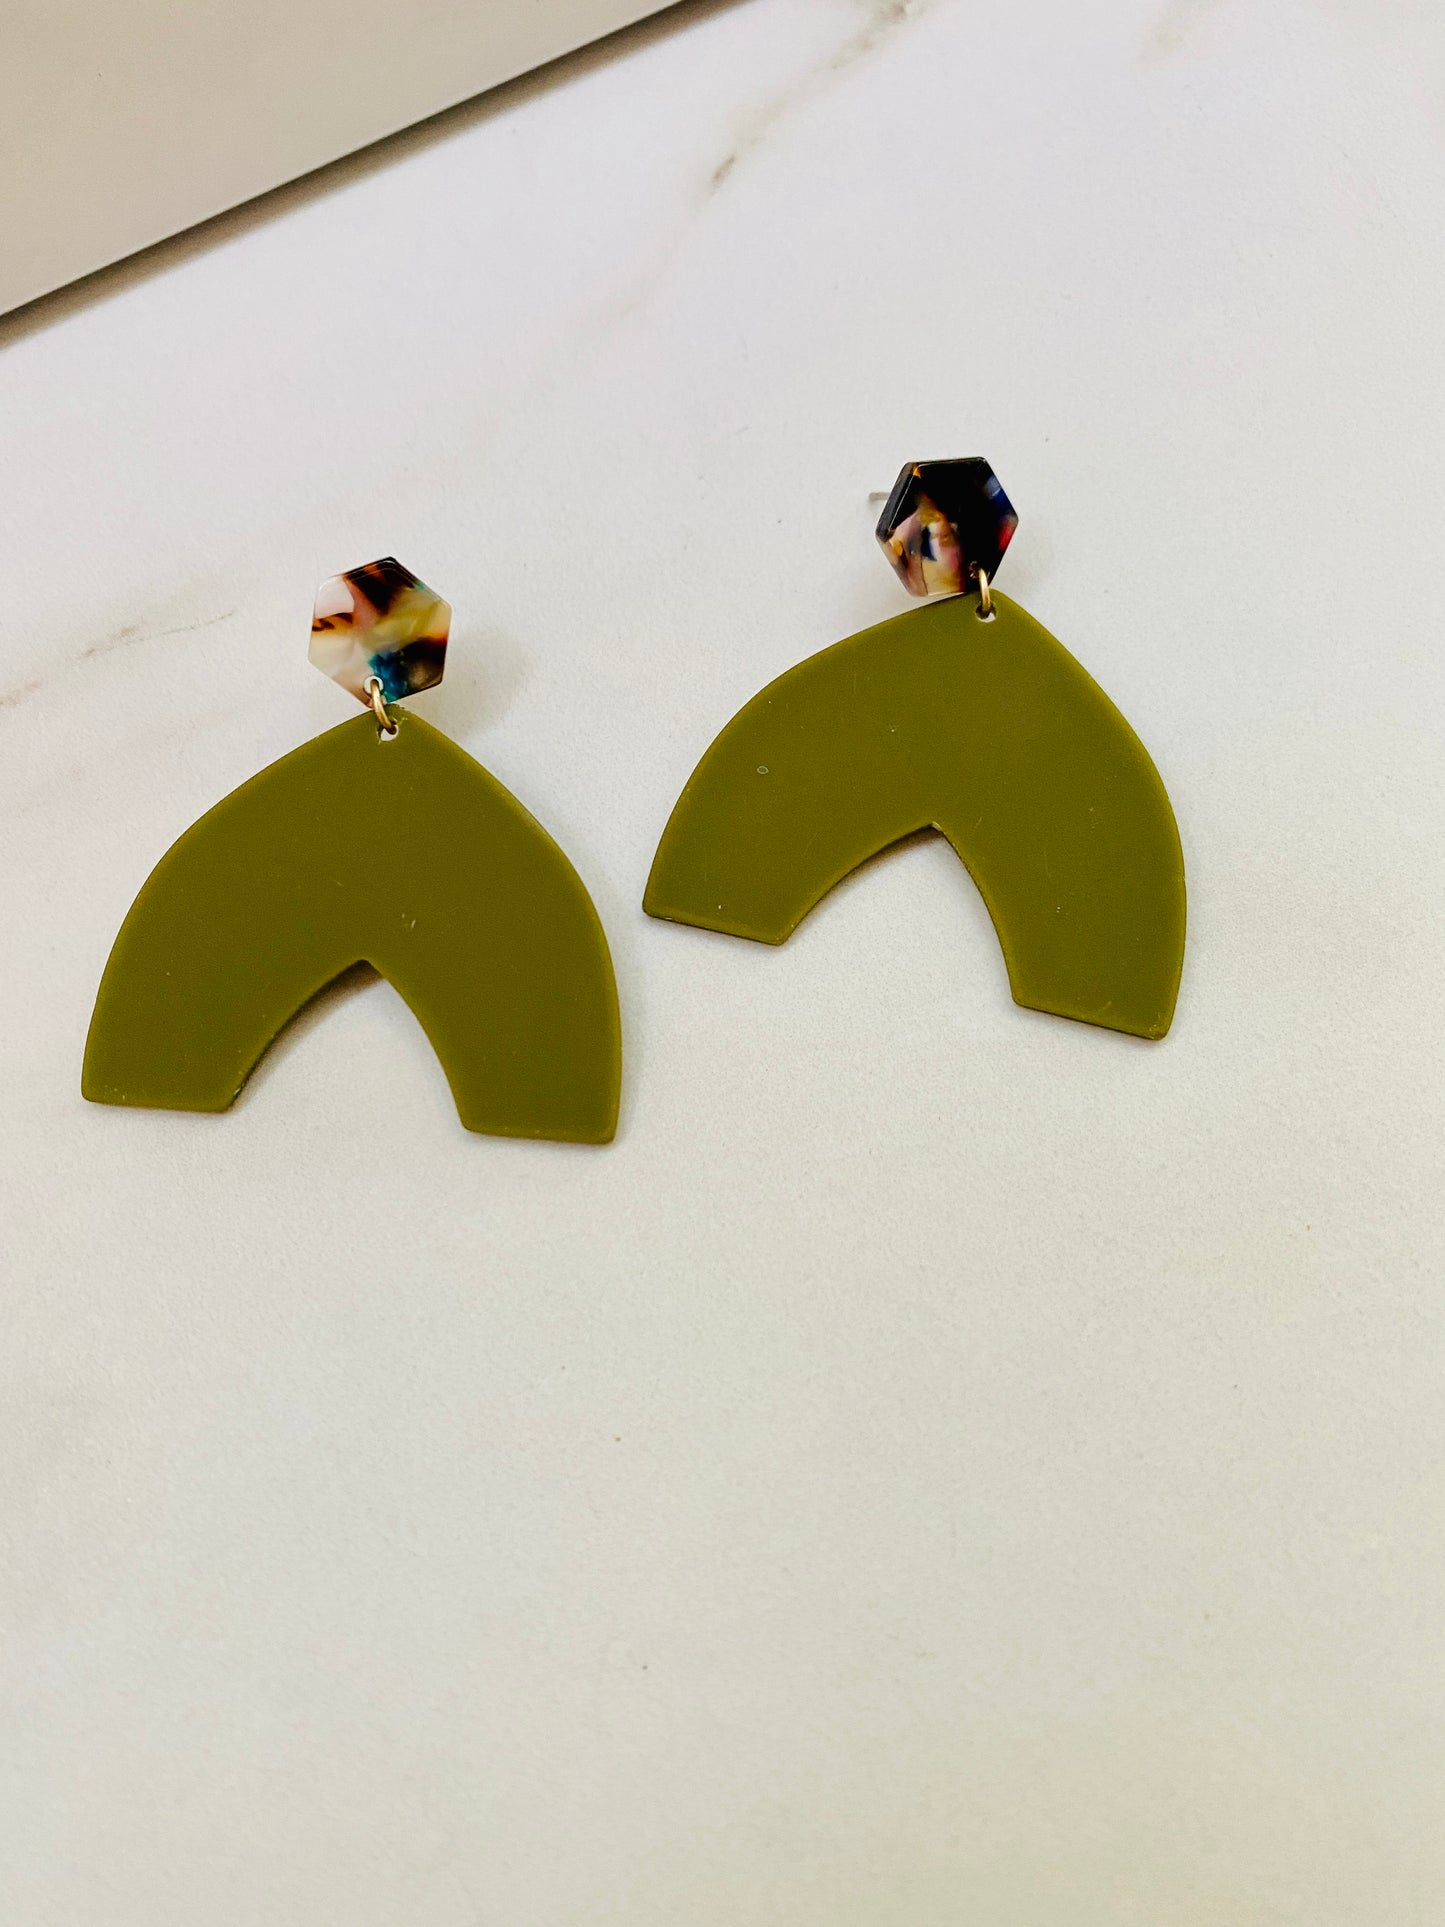 Two-Tone Acetate Arch Earrings in Olive Green and Tortoise Blue